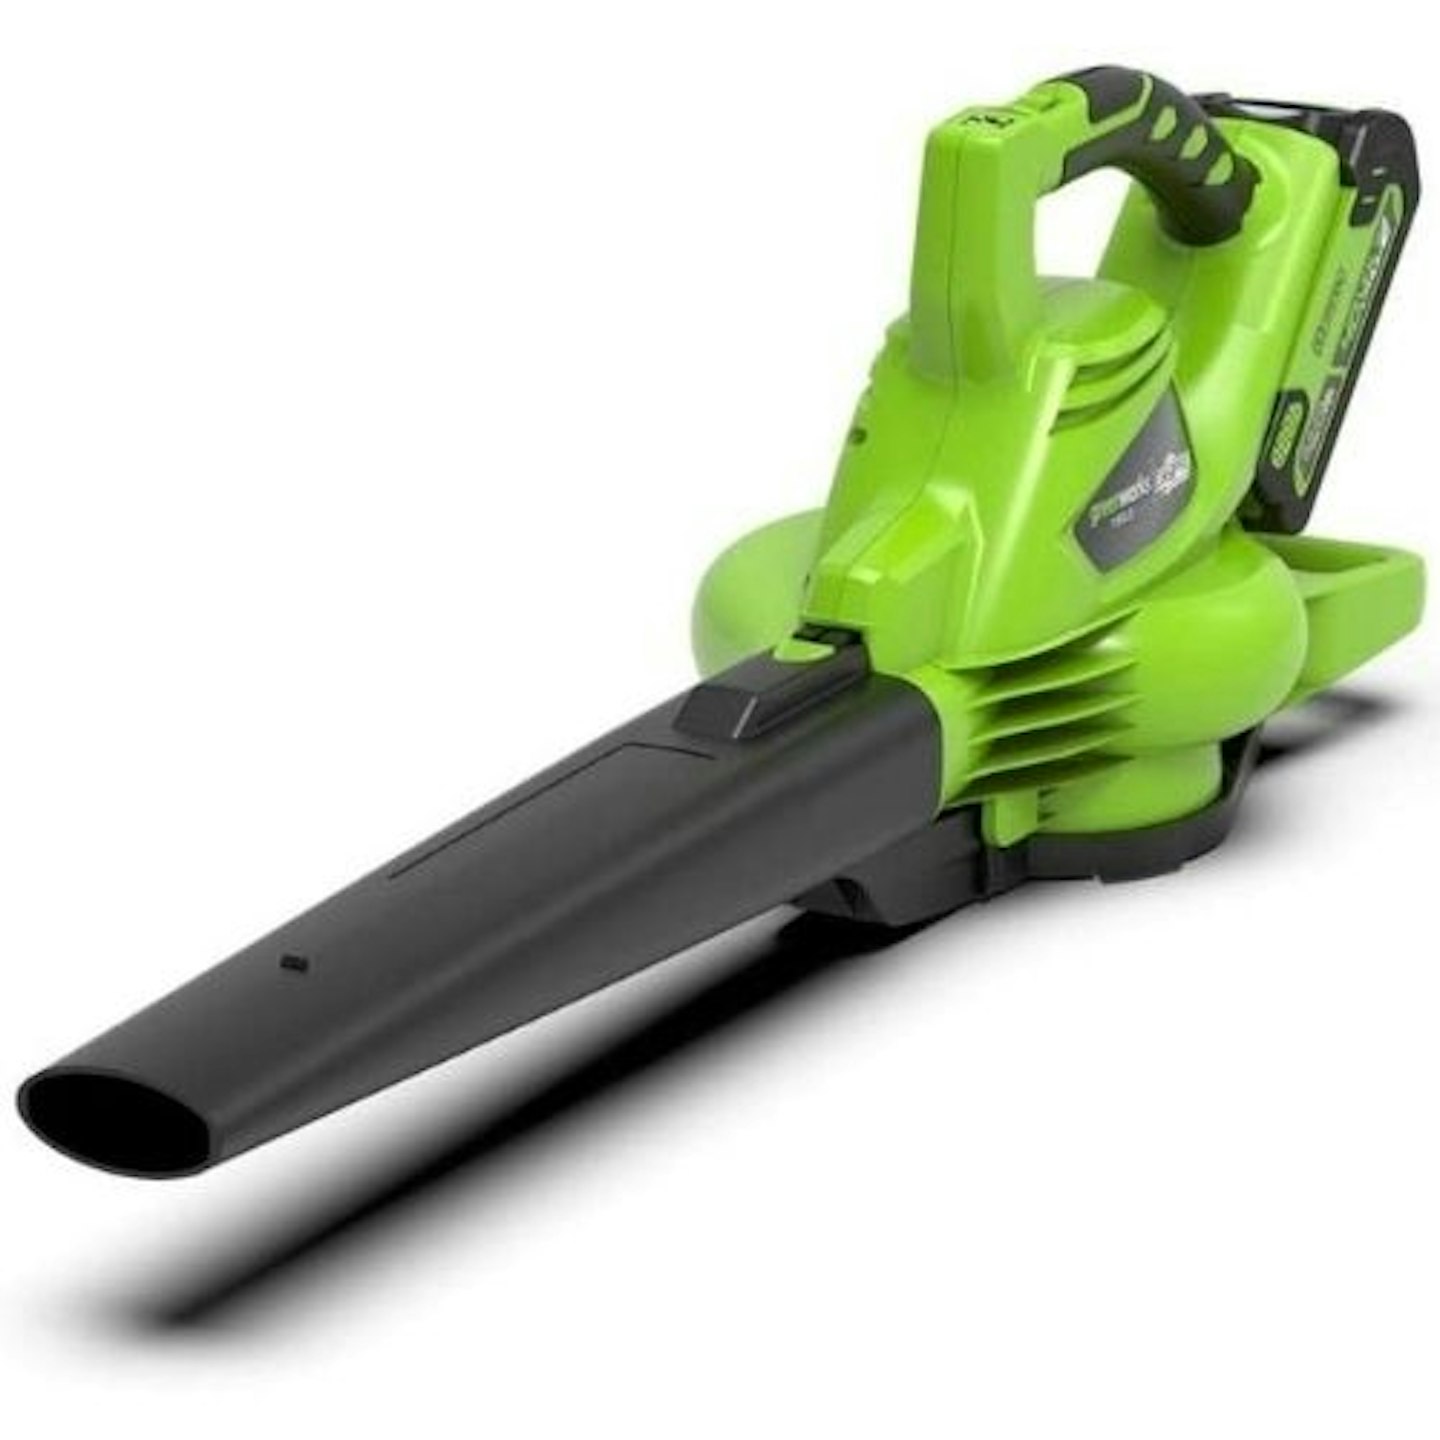 Greenworks Tools GD40BV Cordless Leaf Blower and Vacuum 2-in-1